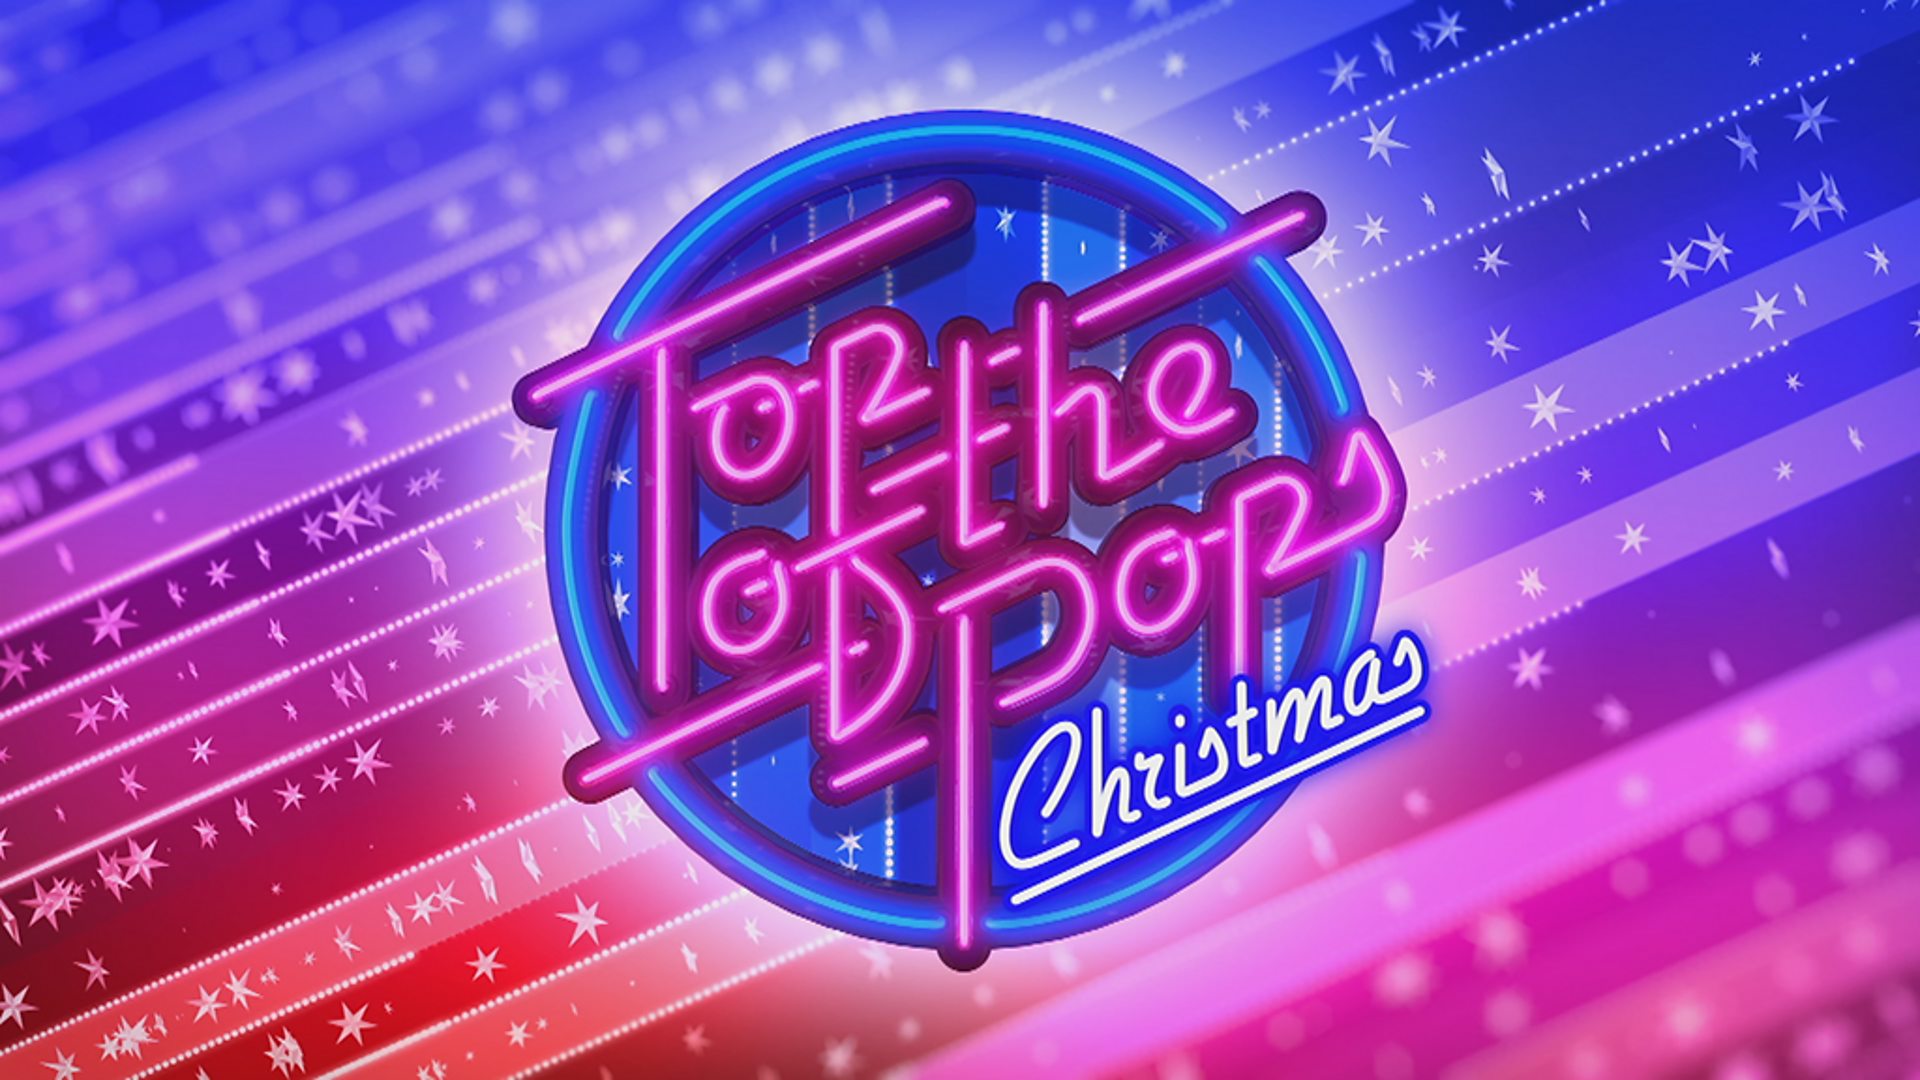 Lionel Green Street Algebra Parana rivier Anne-Marie, Sam Fender, Mabel, KSI and more announced for Top Of The Pops  festive specials hosted by Clara Amfo and Jordan North - Media Centre